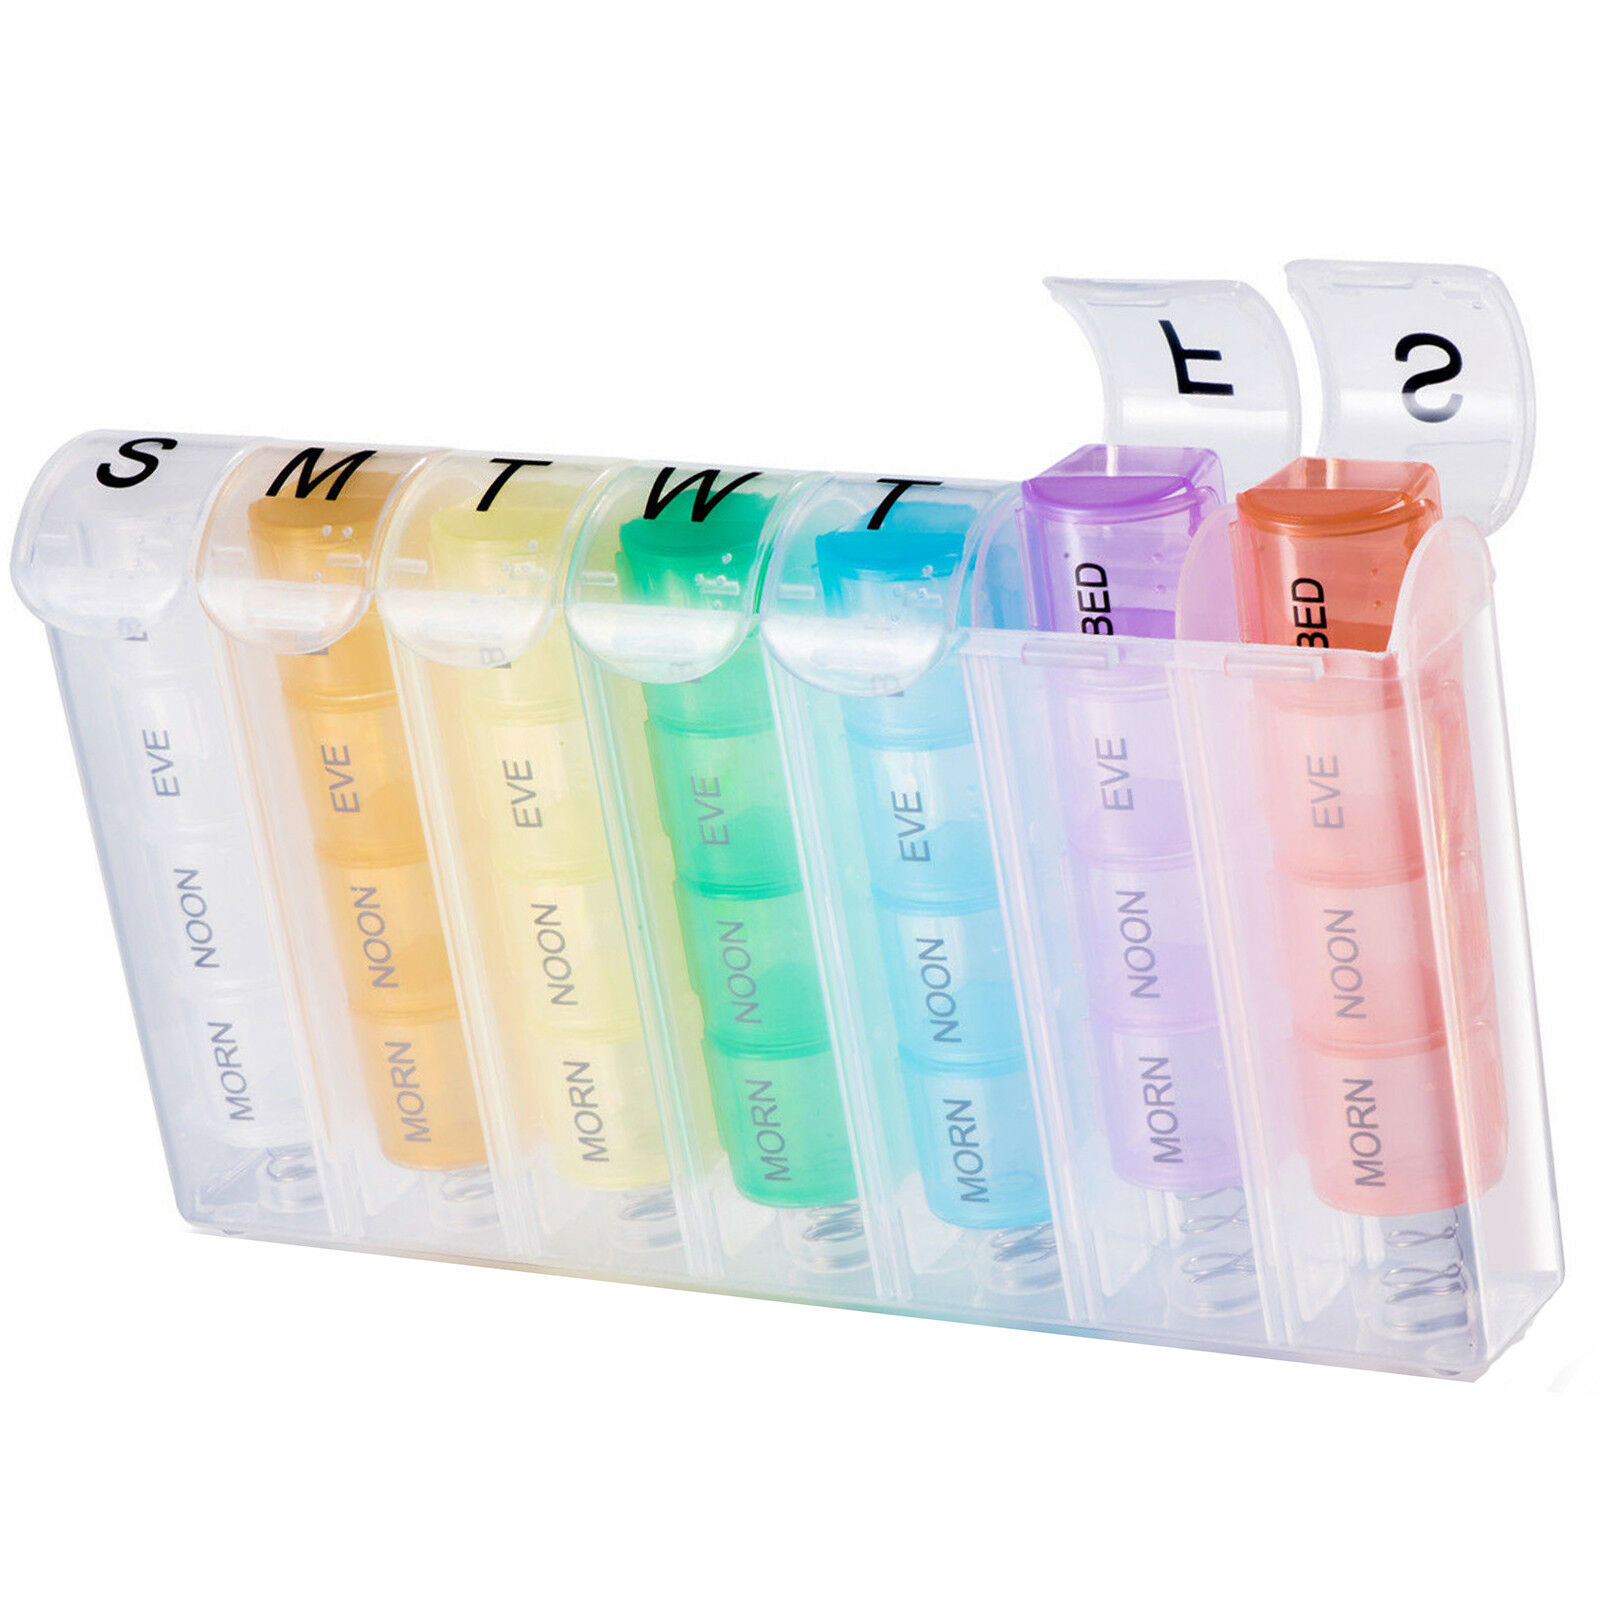 Weekly Pop Up Pill Box Storage Organizer 7 Day Medication Compartment Container